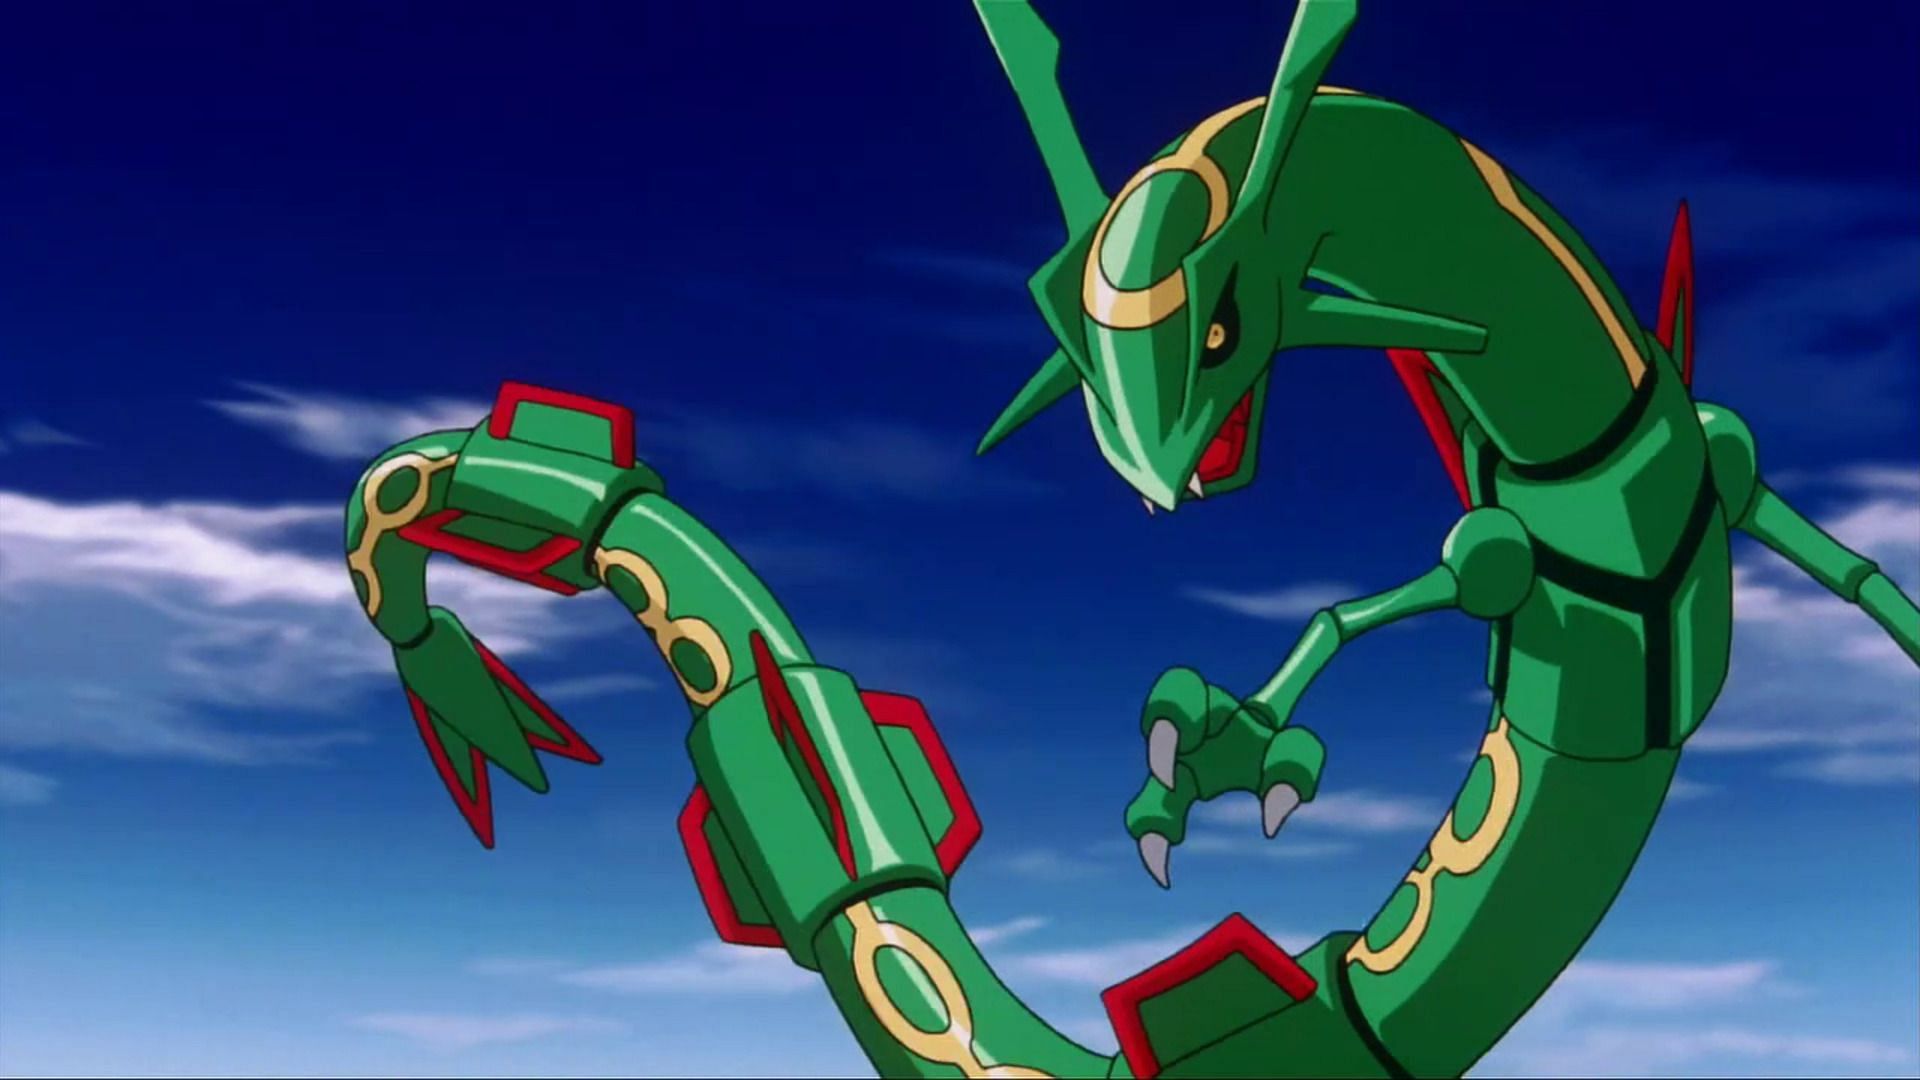 Rayquaza as it appears in the seventh Pokemon movie (Image via The Pokemon Company)